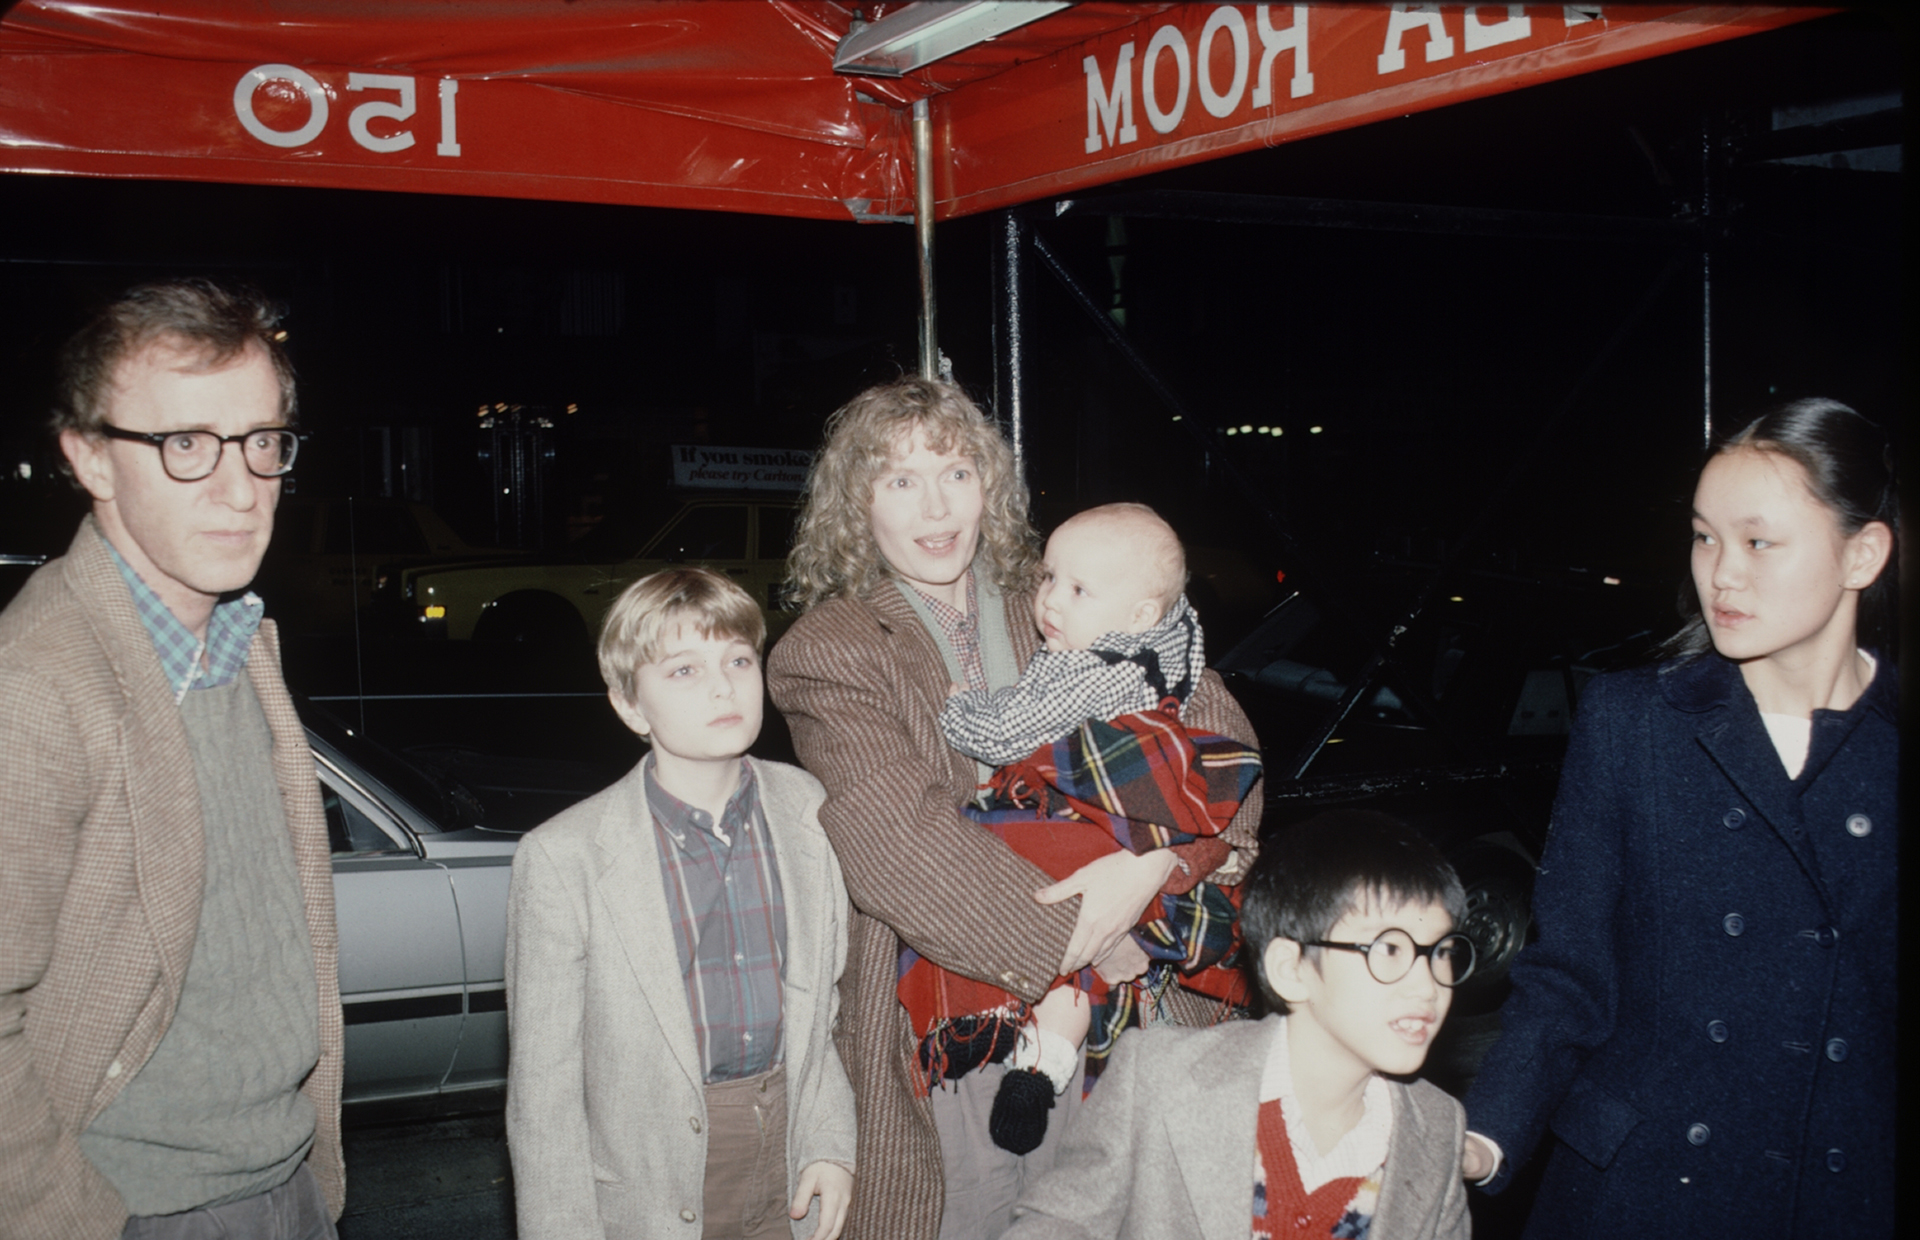 Woody Allen with Mia Farrow and children, including Soon Yi Previn